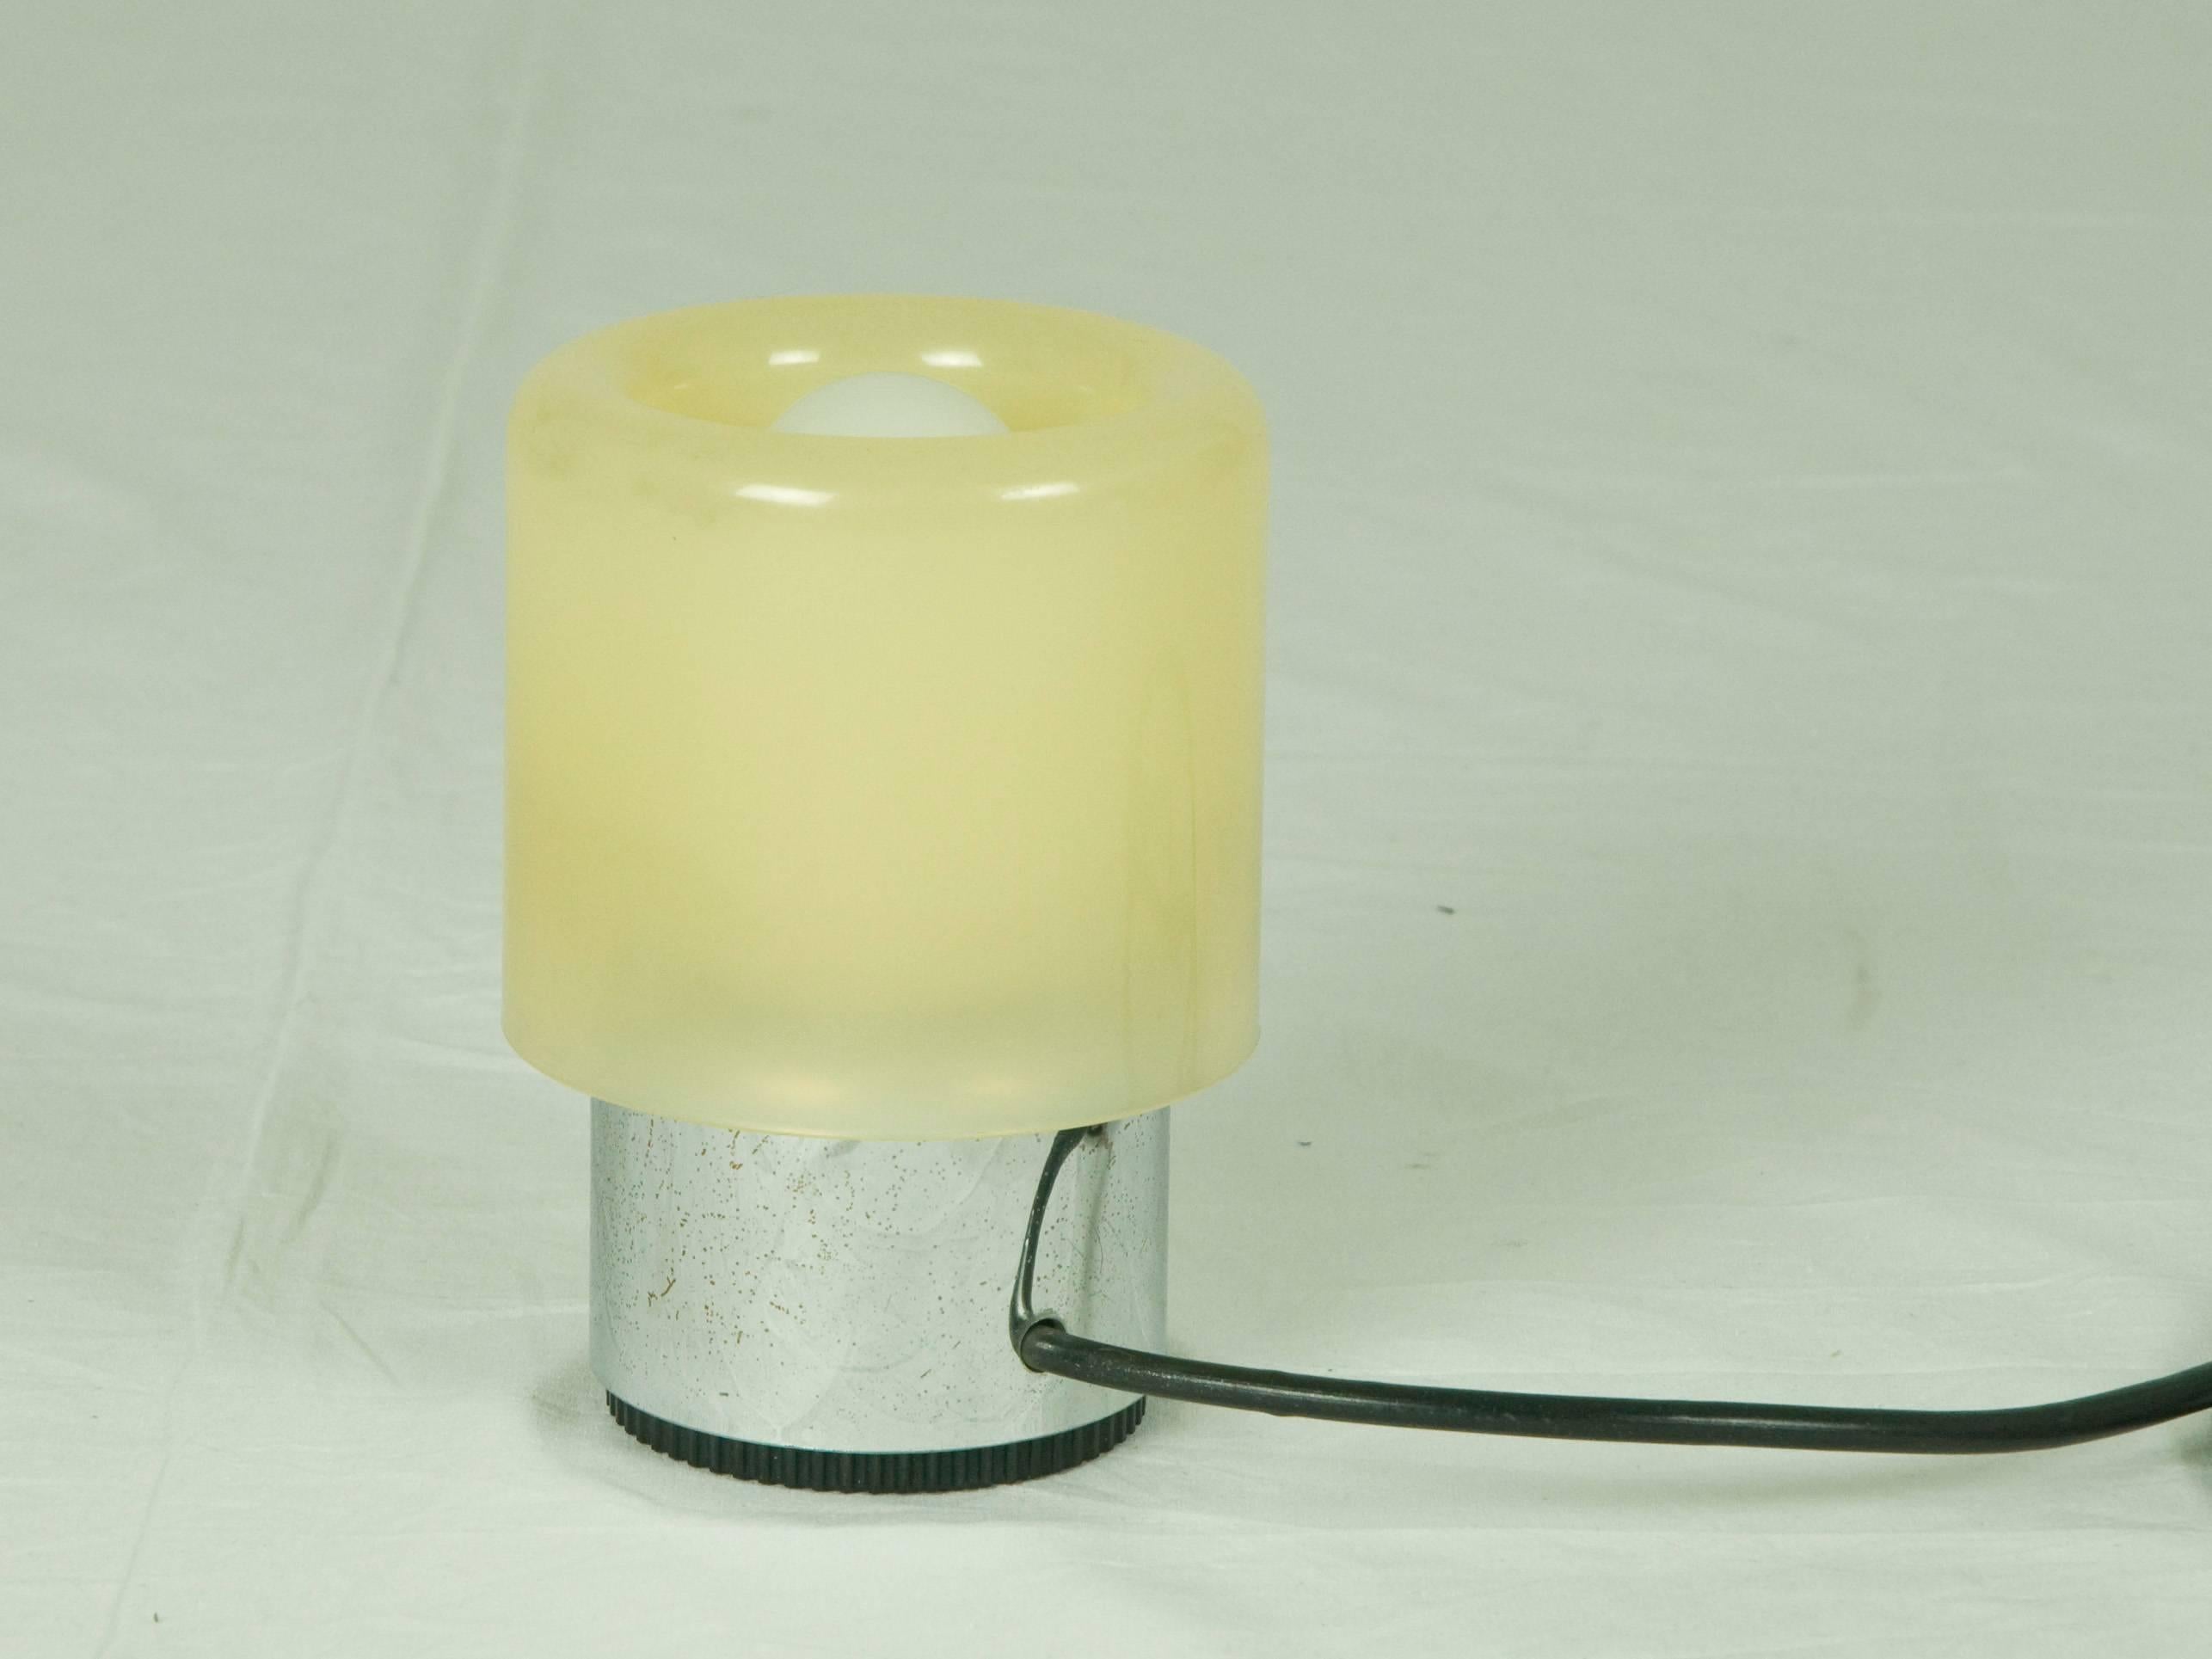 This small table lamp was produced by Kartell, Italy in 1971. The lamp is made from a chromed ABS plastic base and a polypropylene shade. Thanks to its internal switch, you can switch on/off the light by a single pressure. The lamp remains in a good